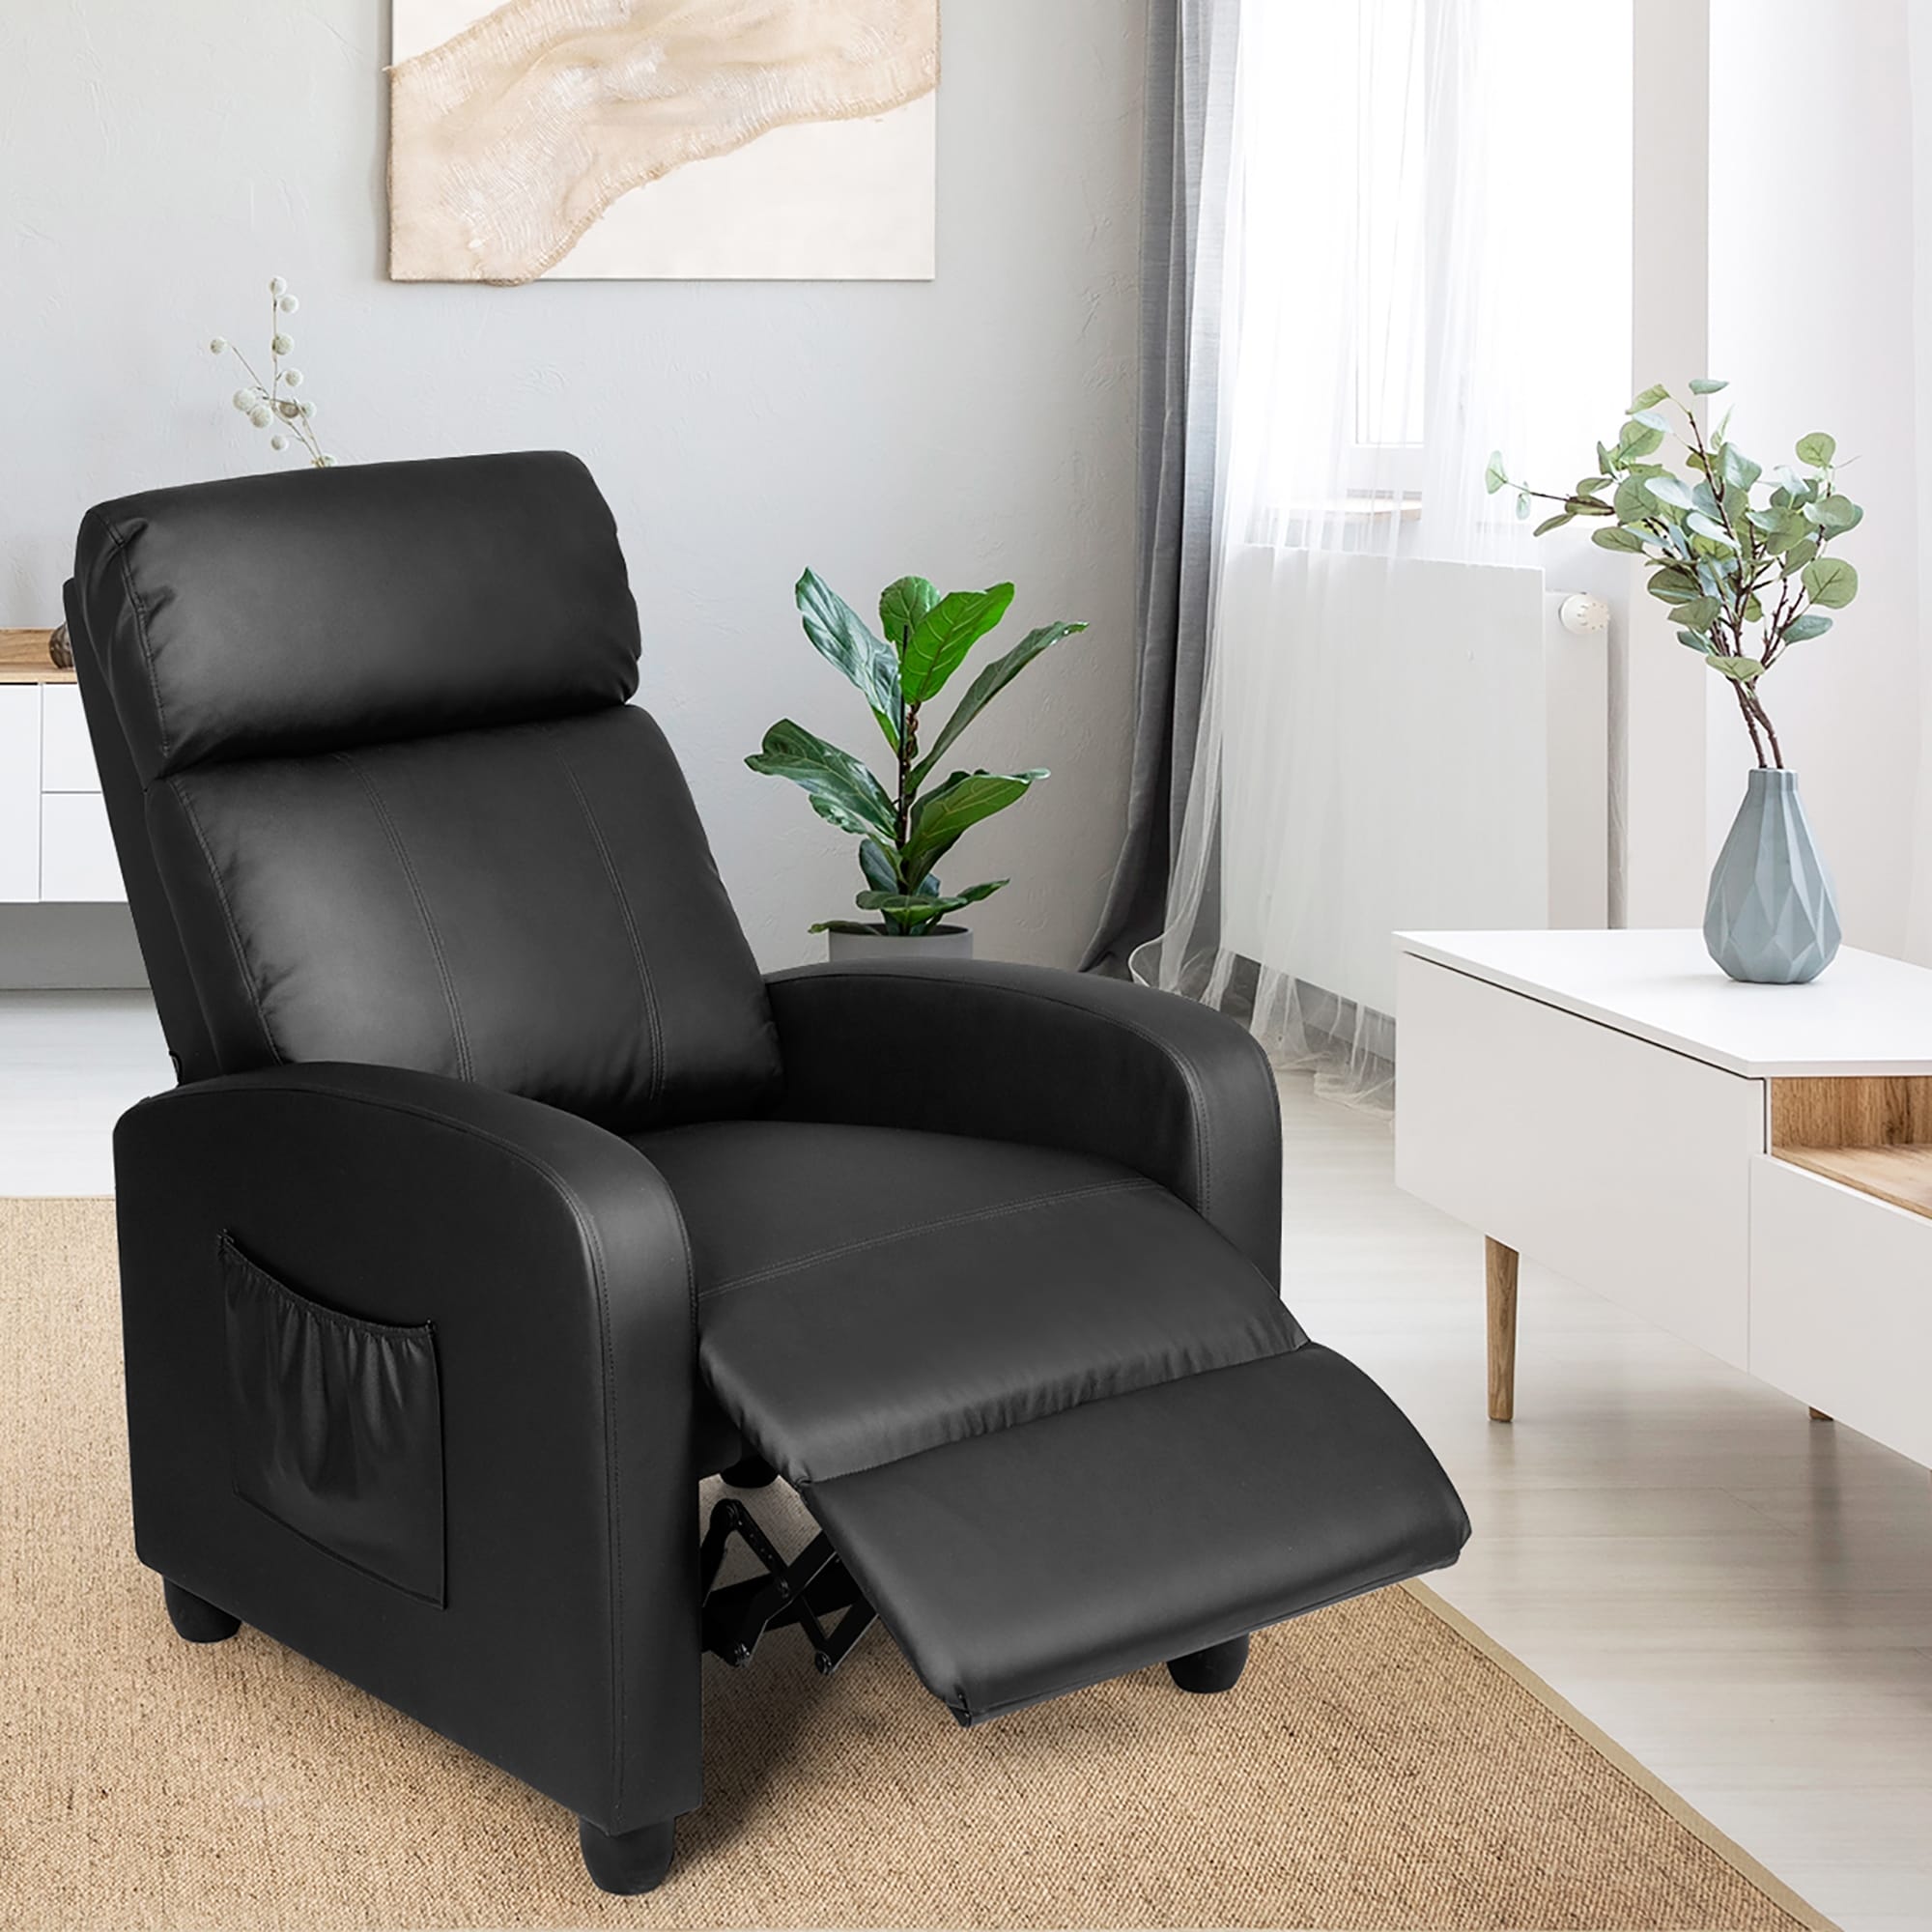 Homall Massage Recliner Chair, Recliner Sofa PU Leather for Adults,  Recliners Home Theater Seating with Lumbar Support, Reclining Sofa Chair  for